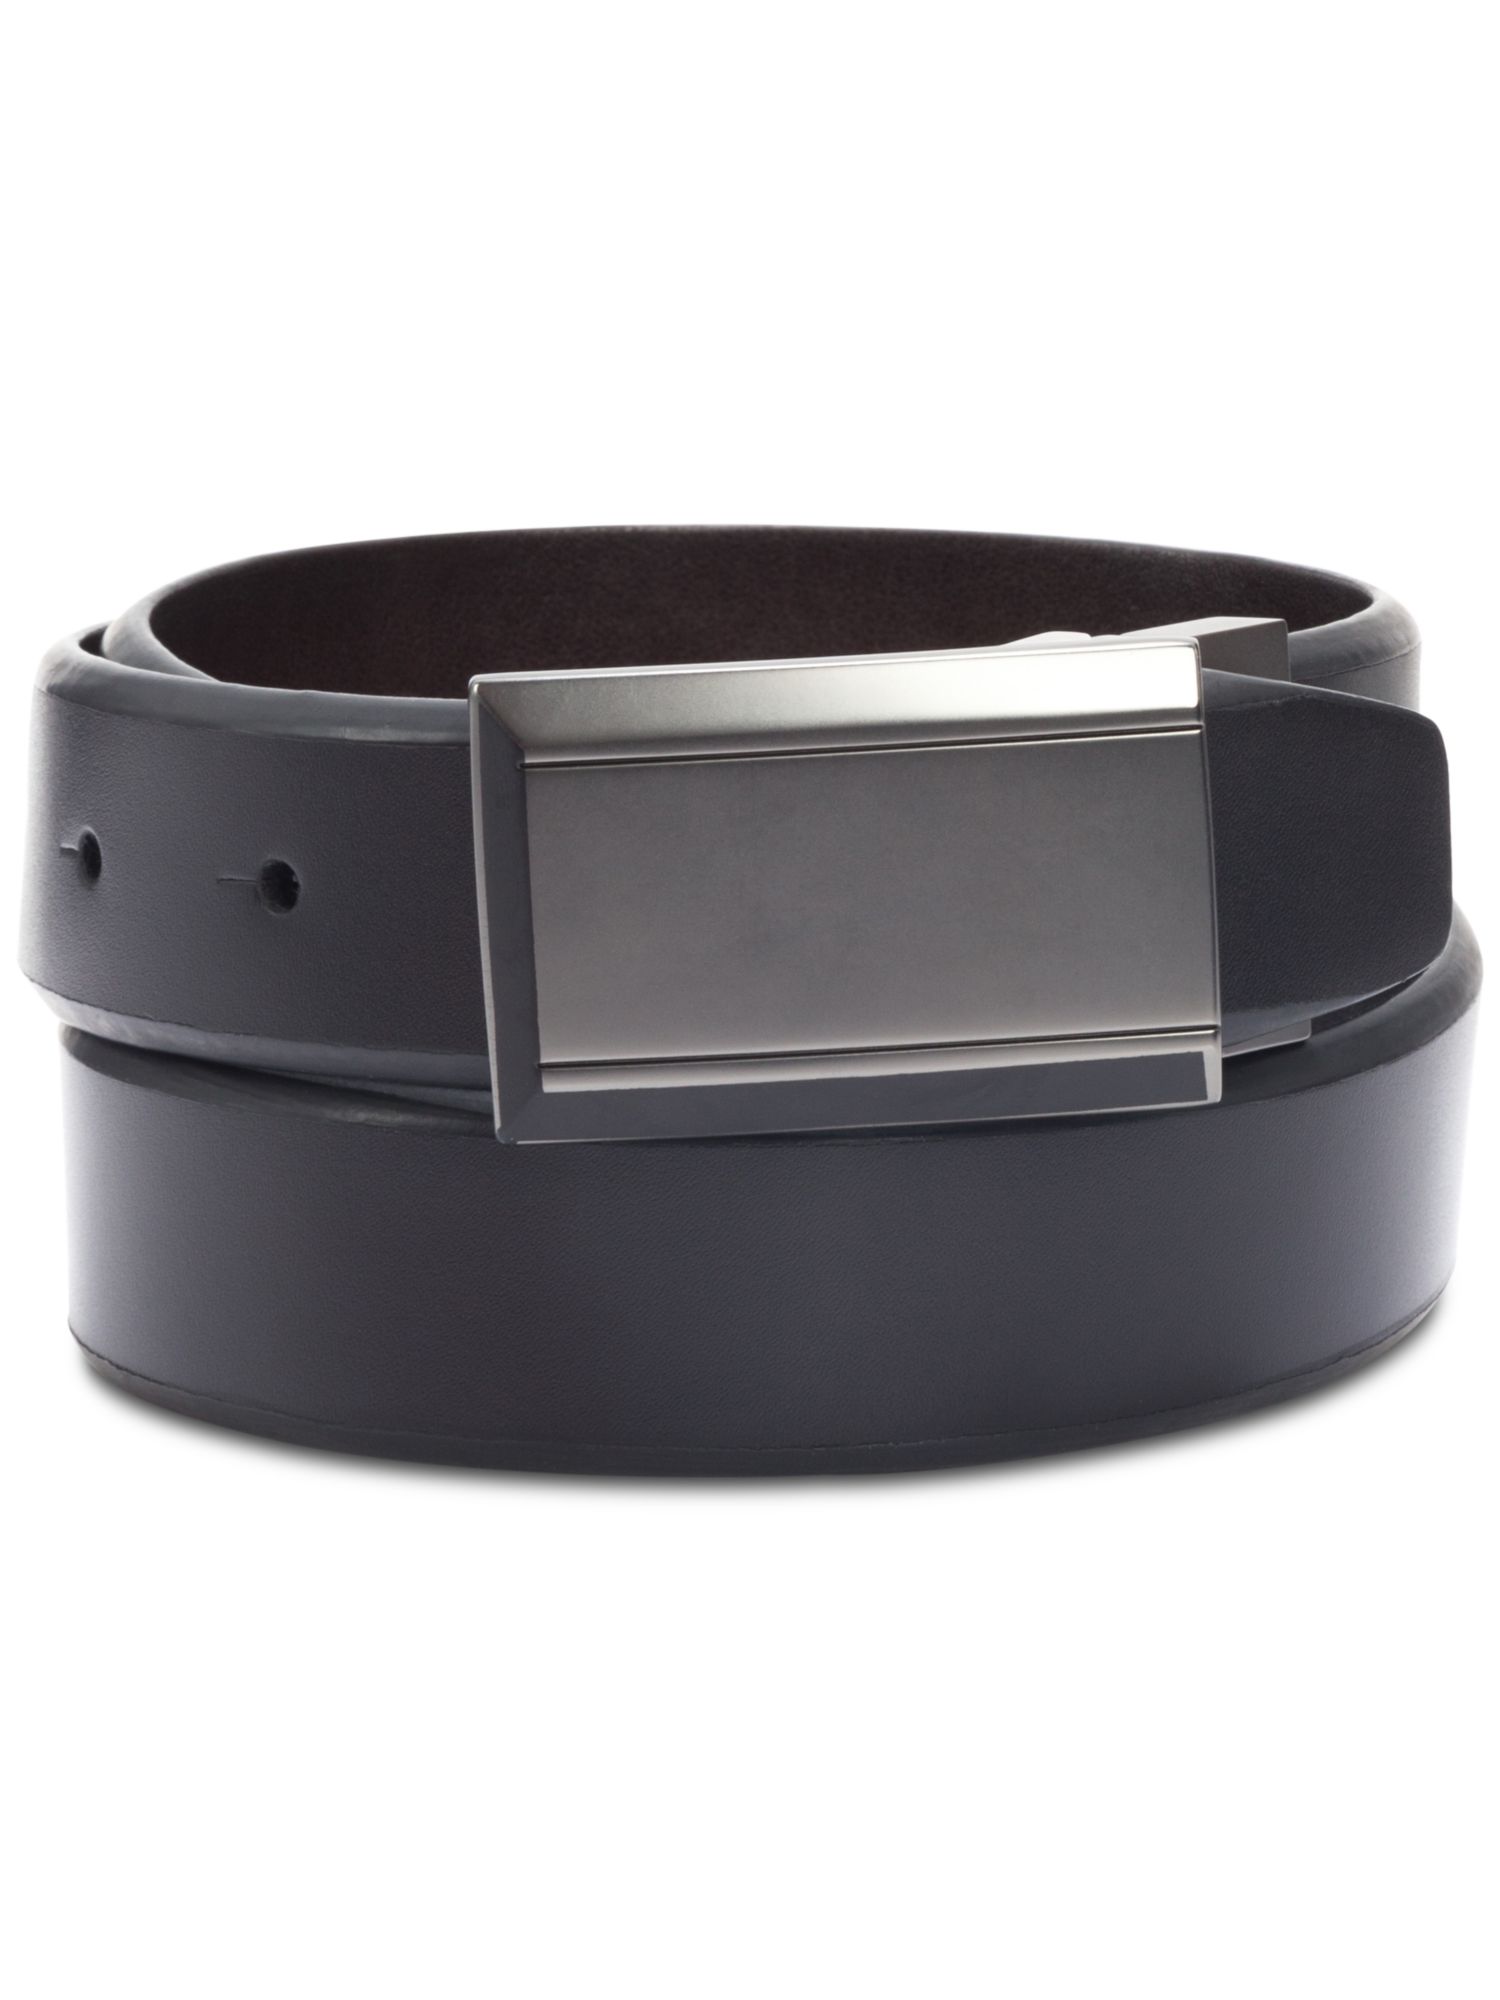 REACTION KENNETH COLE Mens Black Beveled Reversible Faux Leather Casual Belt 32 - image 1 of 3